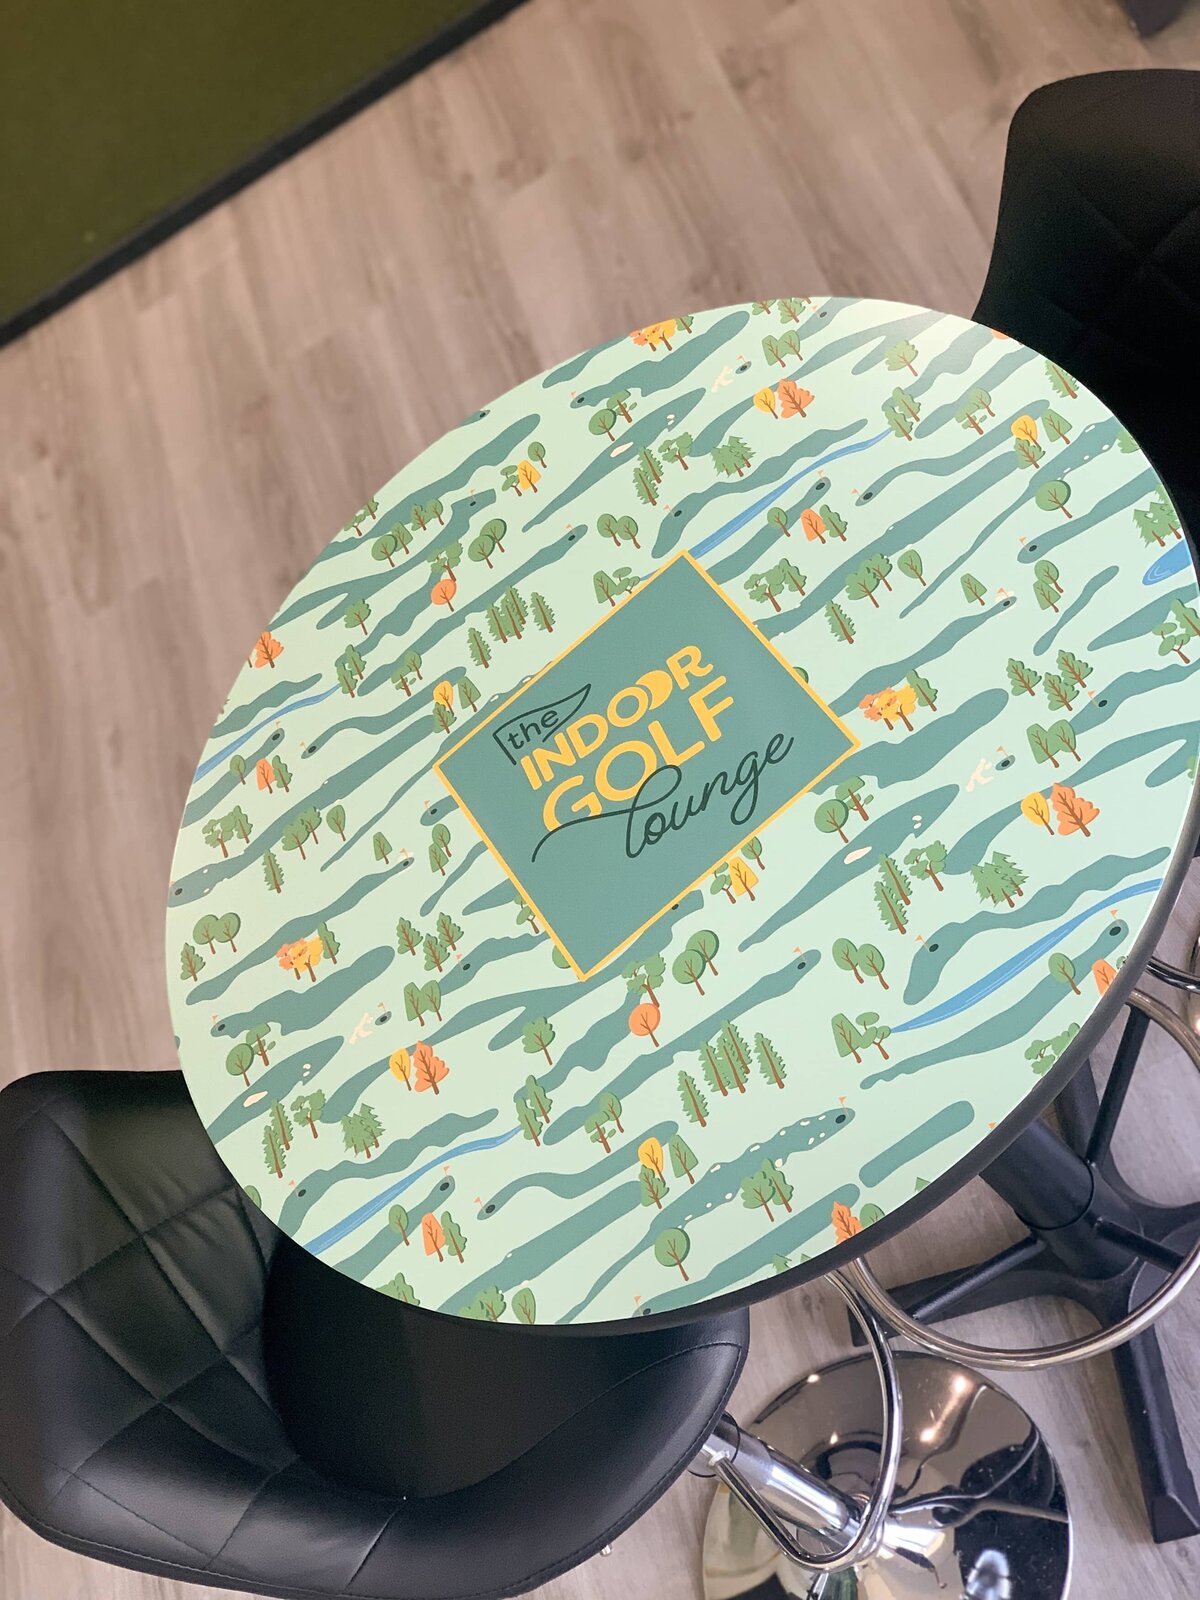 A round, high-top table with a custom printed top. The Indoor Golf Lounge brand pattern with a light green background with the logo in the center.